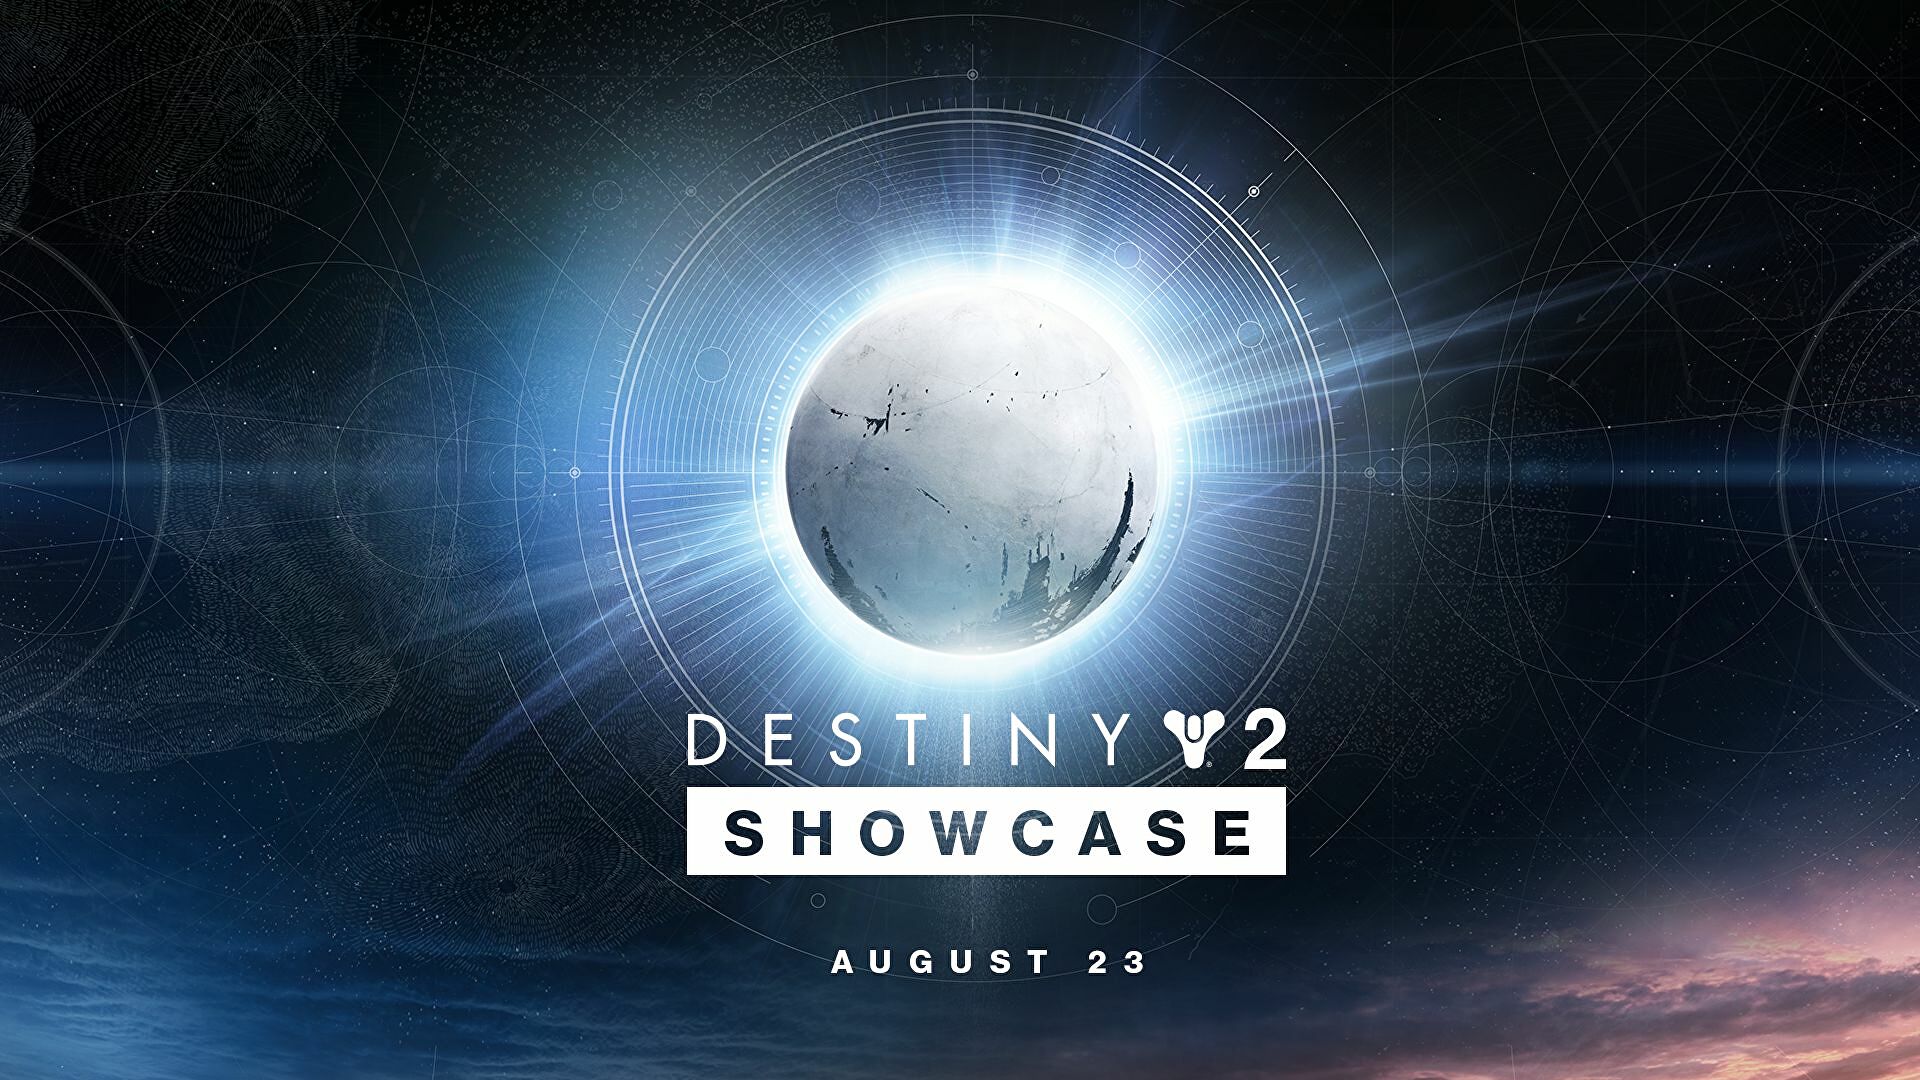 Destiny 2 Showcase set for August 23 could provide us with a look at the Lightfall expansion